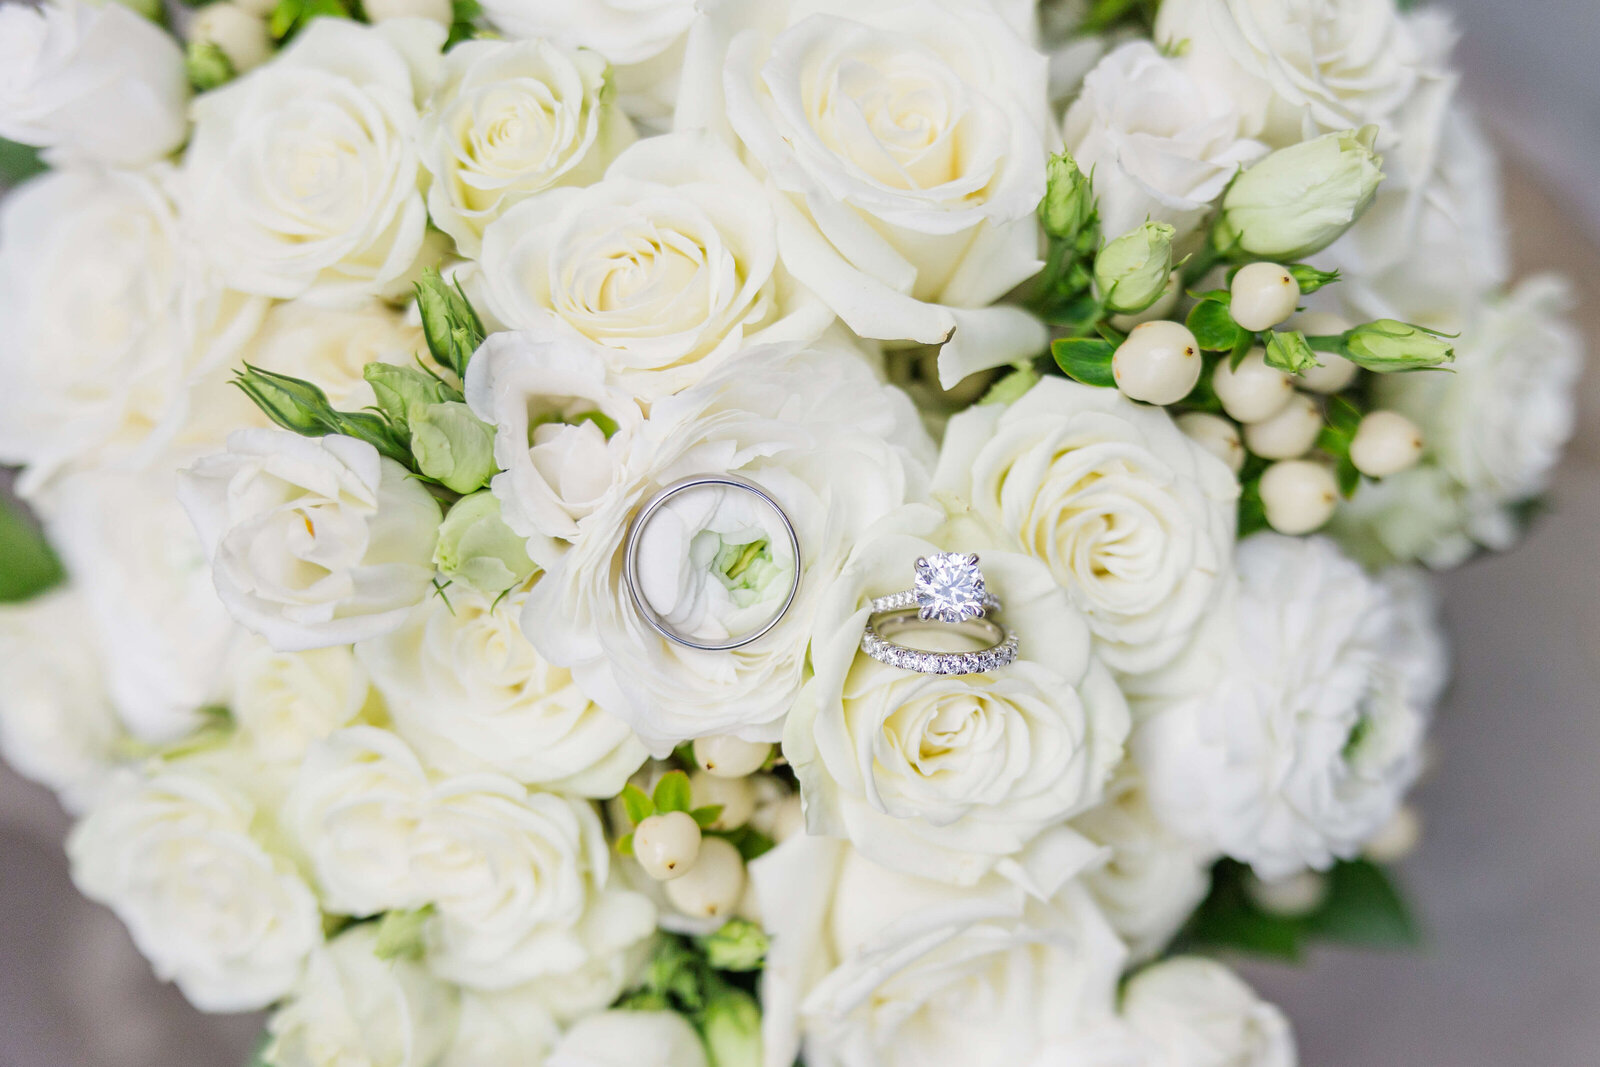 Close up photo of a white wedding bouquet with a man and woman's wedding rings.